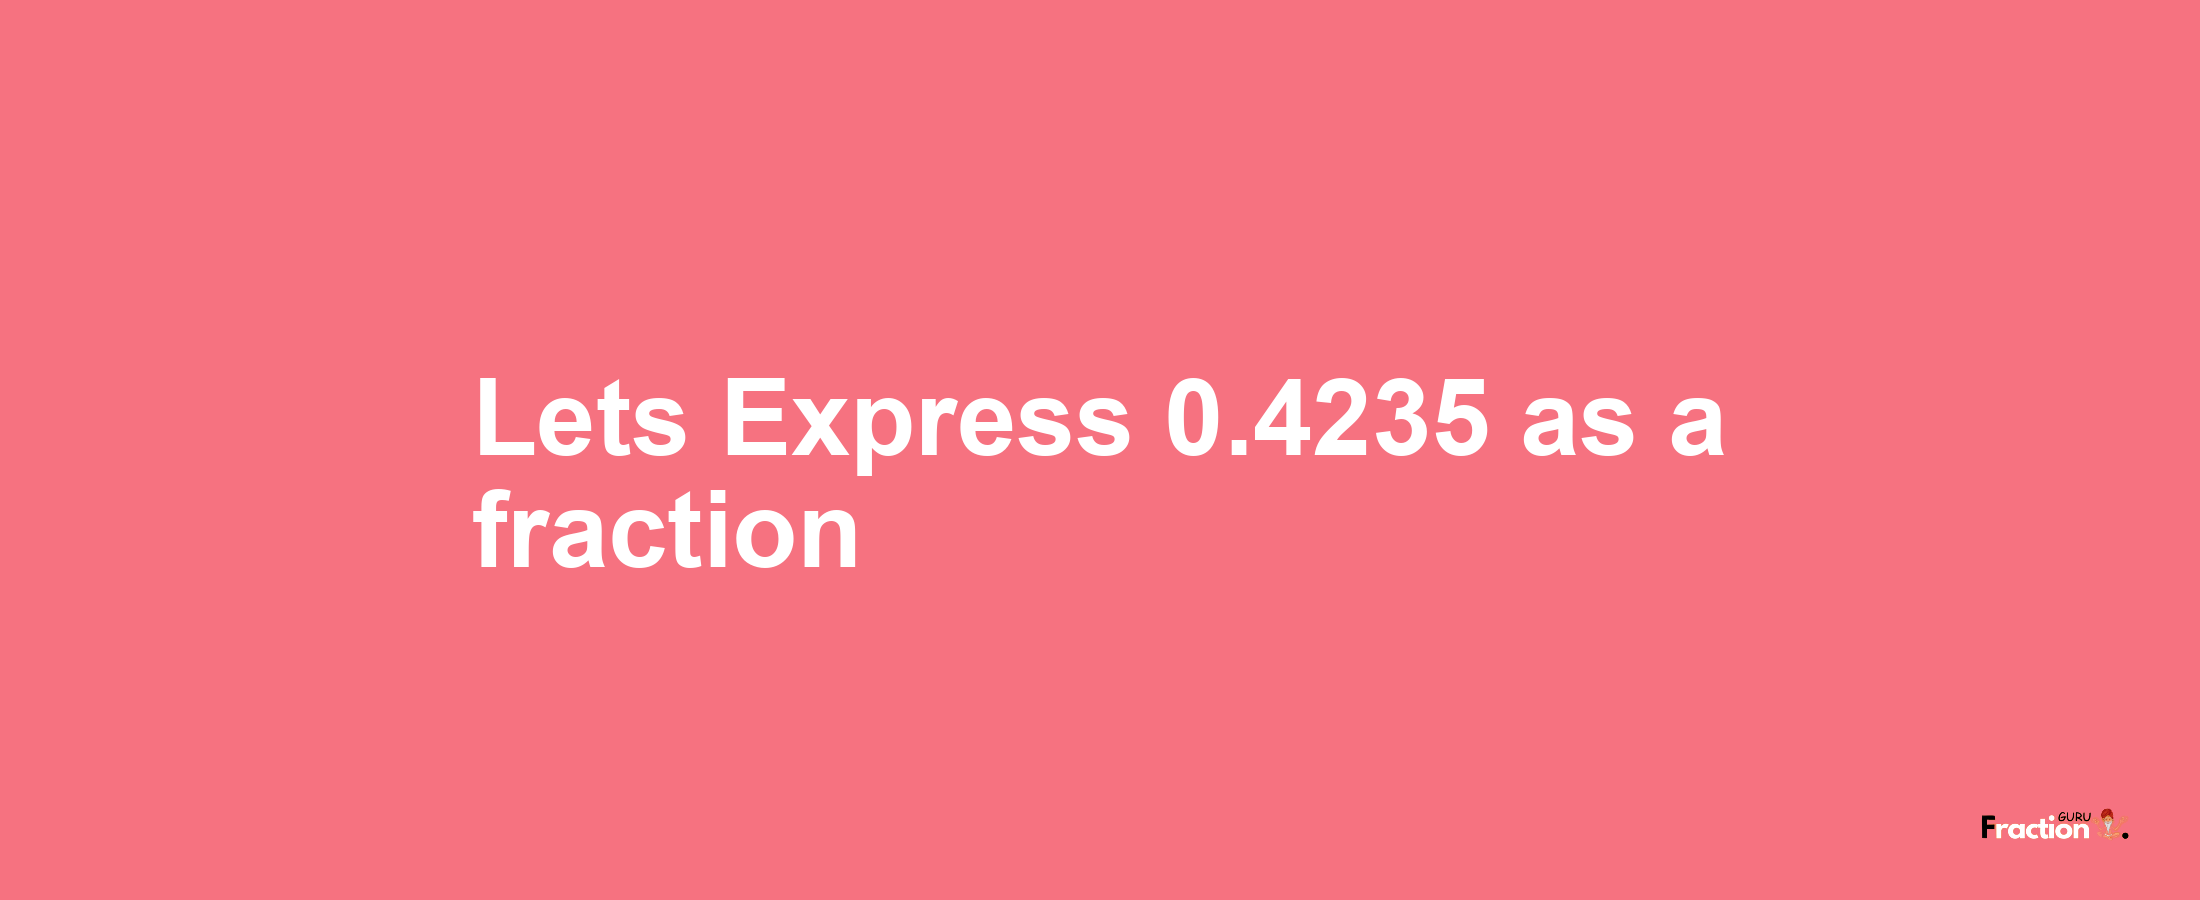 Lets Express 0.4235 as afraction